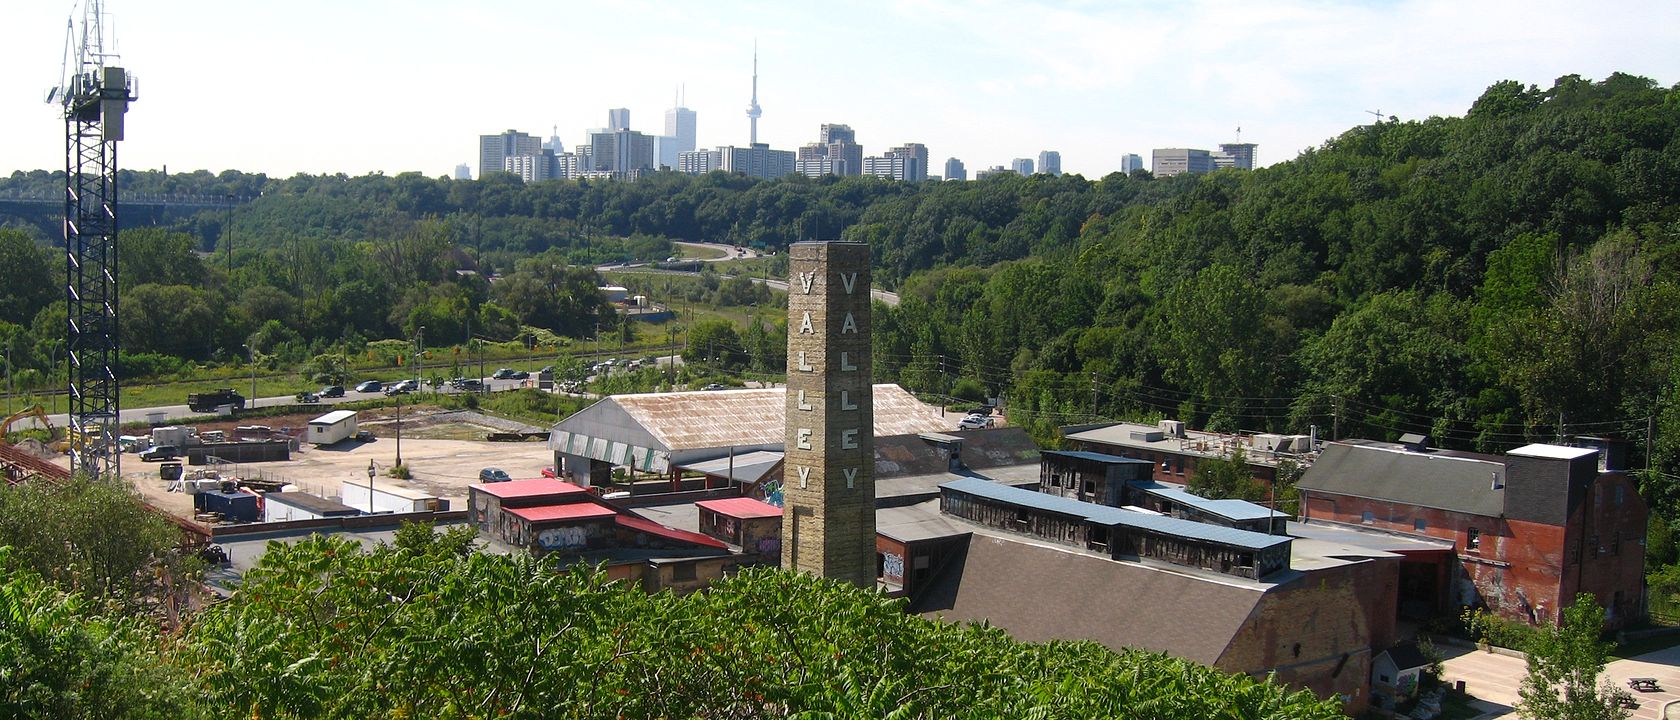 Evergreen Brick Works revitalization project at the former Don Valley Brick Works location